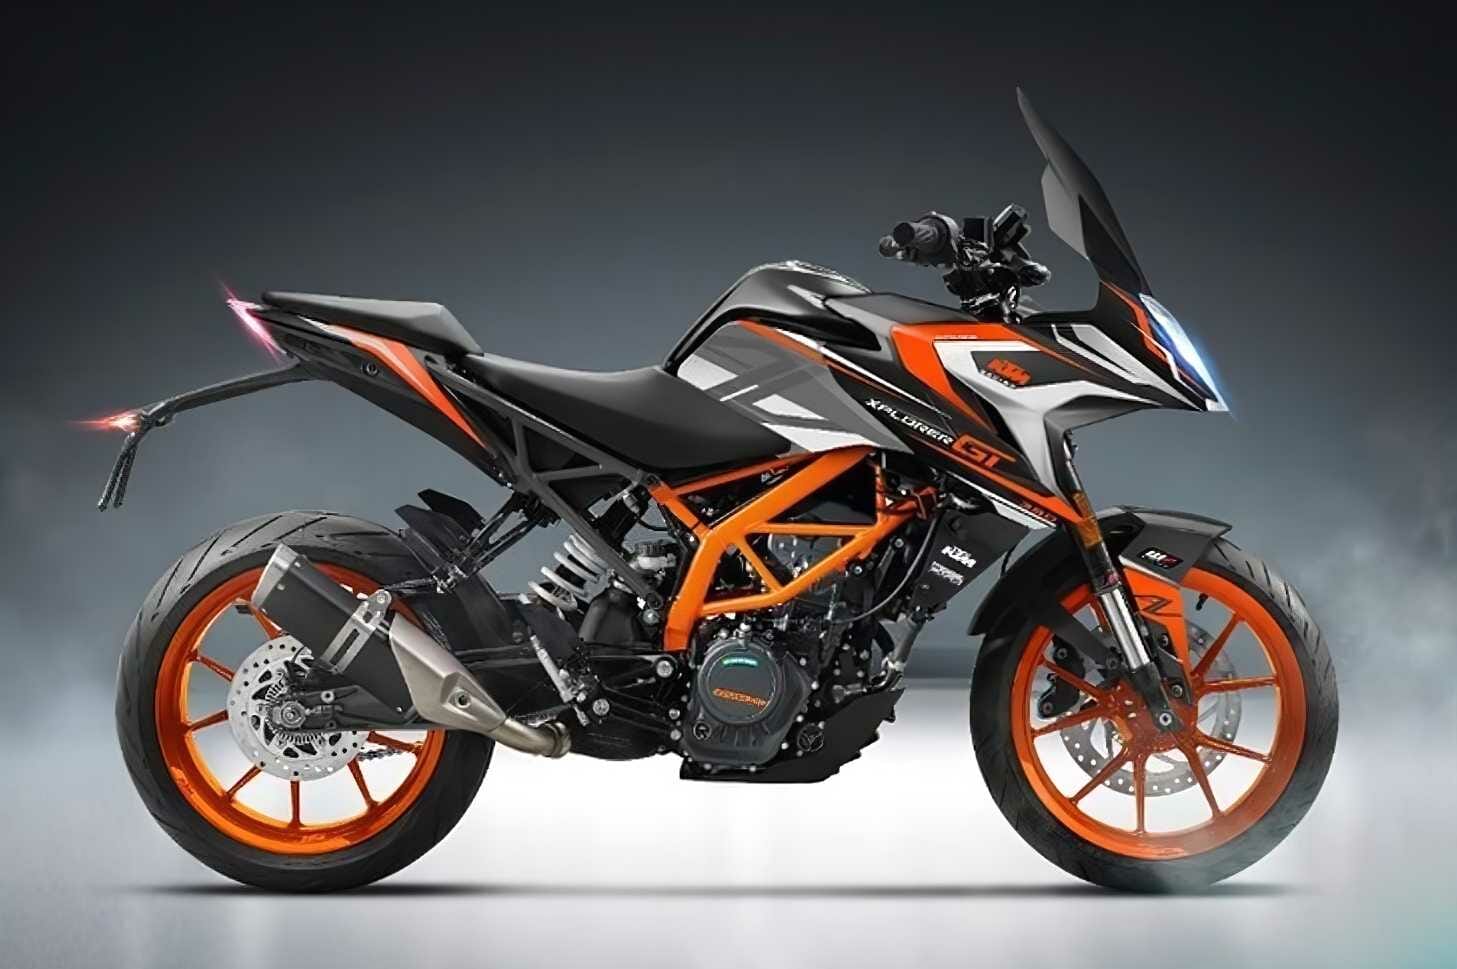 Adventure front for the KTM 390 Duke
- also in the MOTORCYCLES.NEWS APP